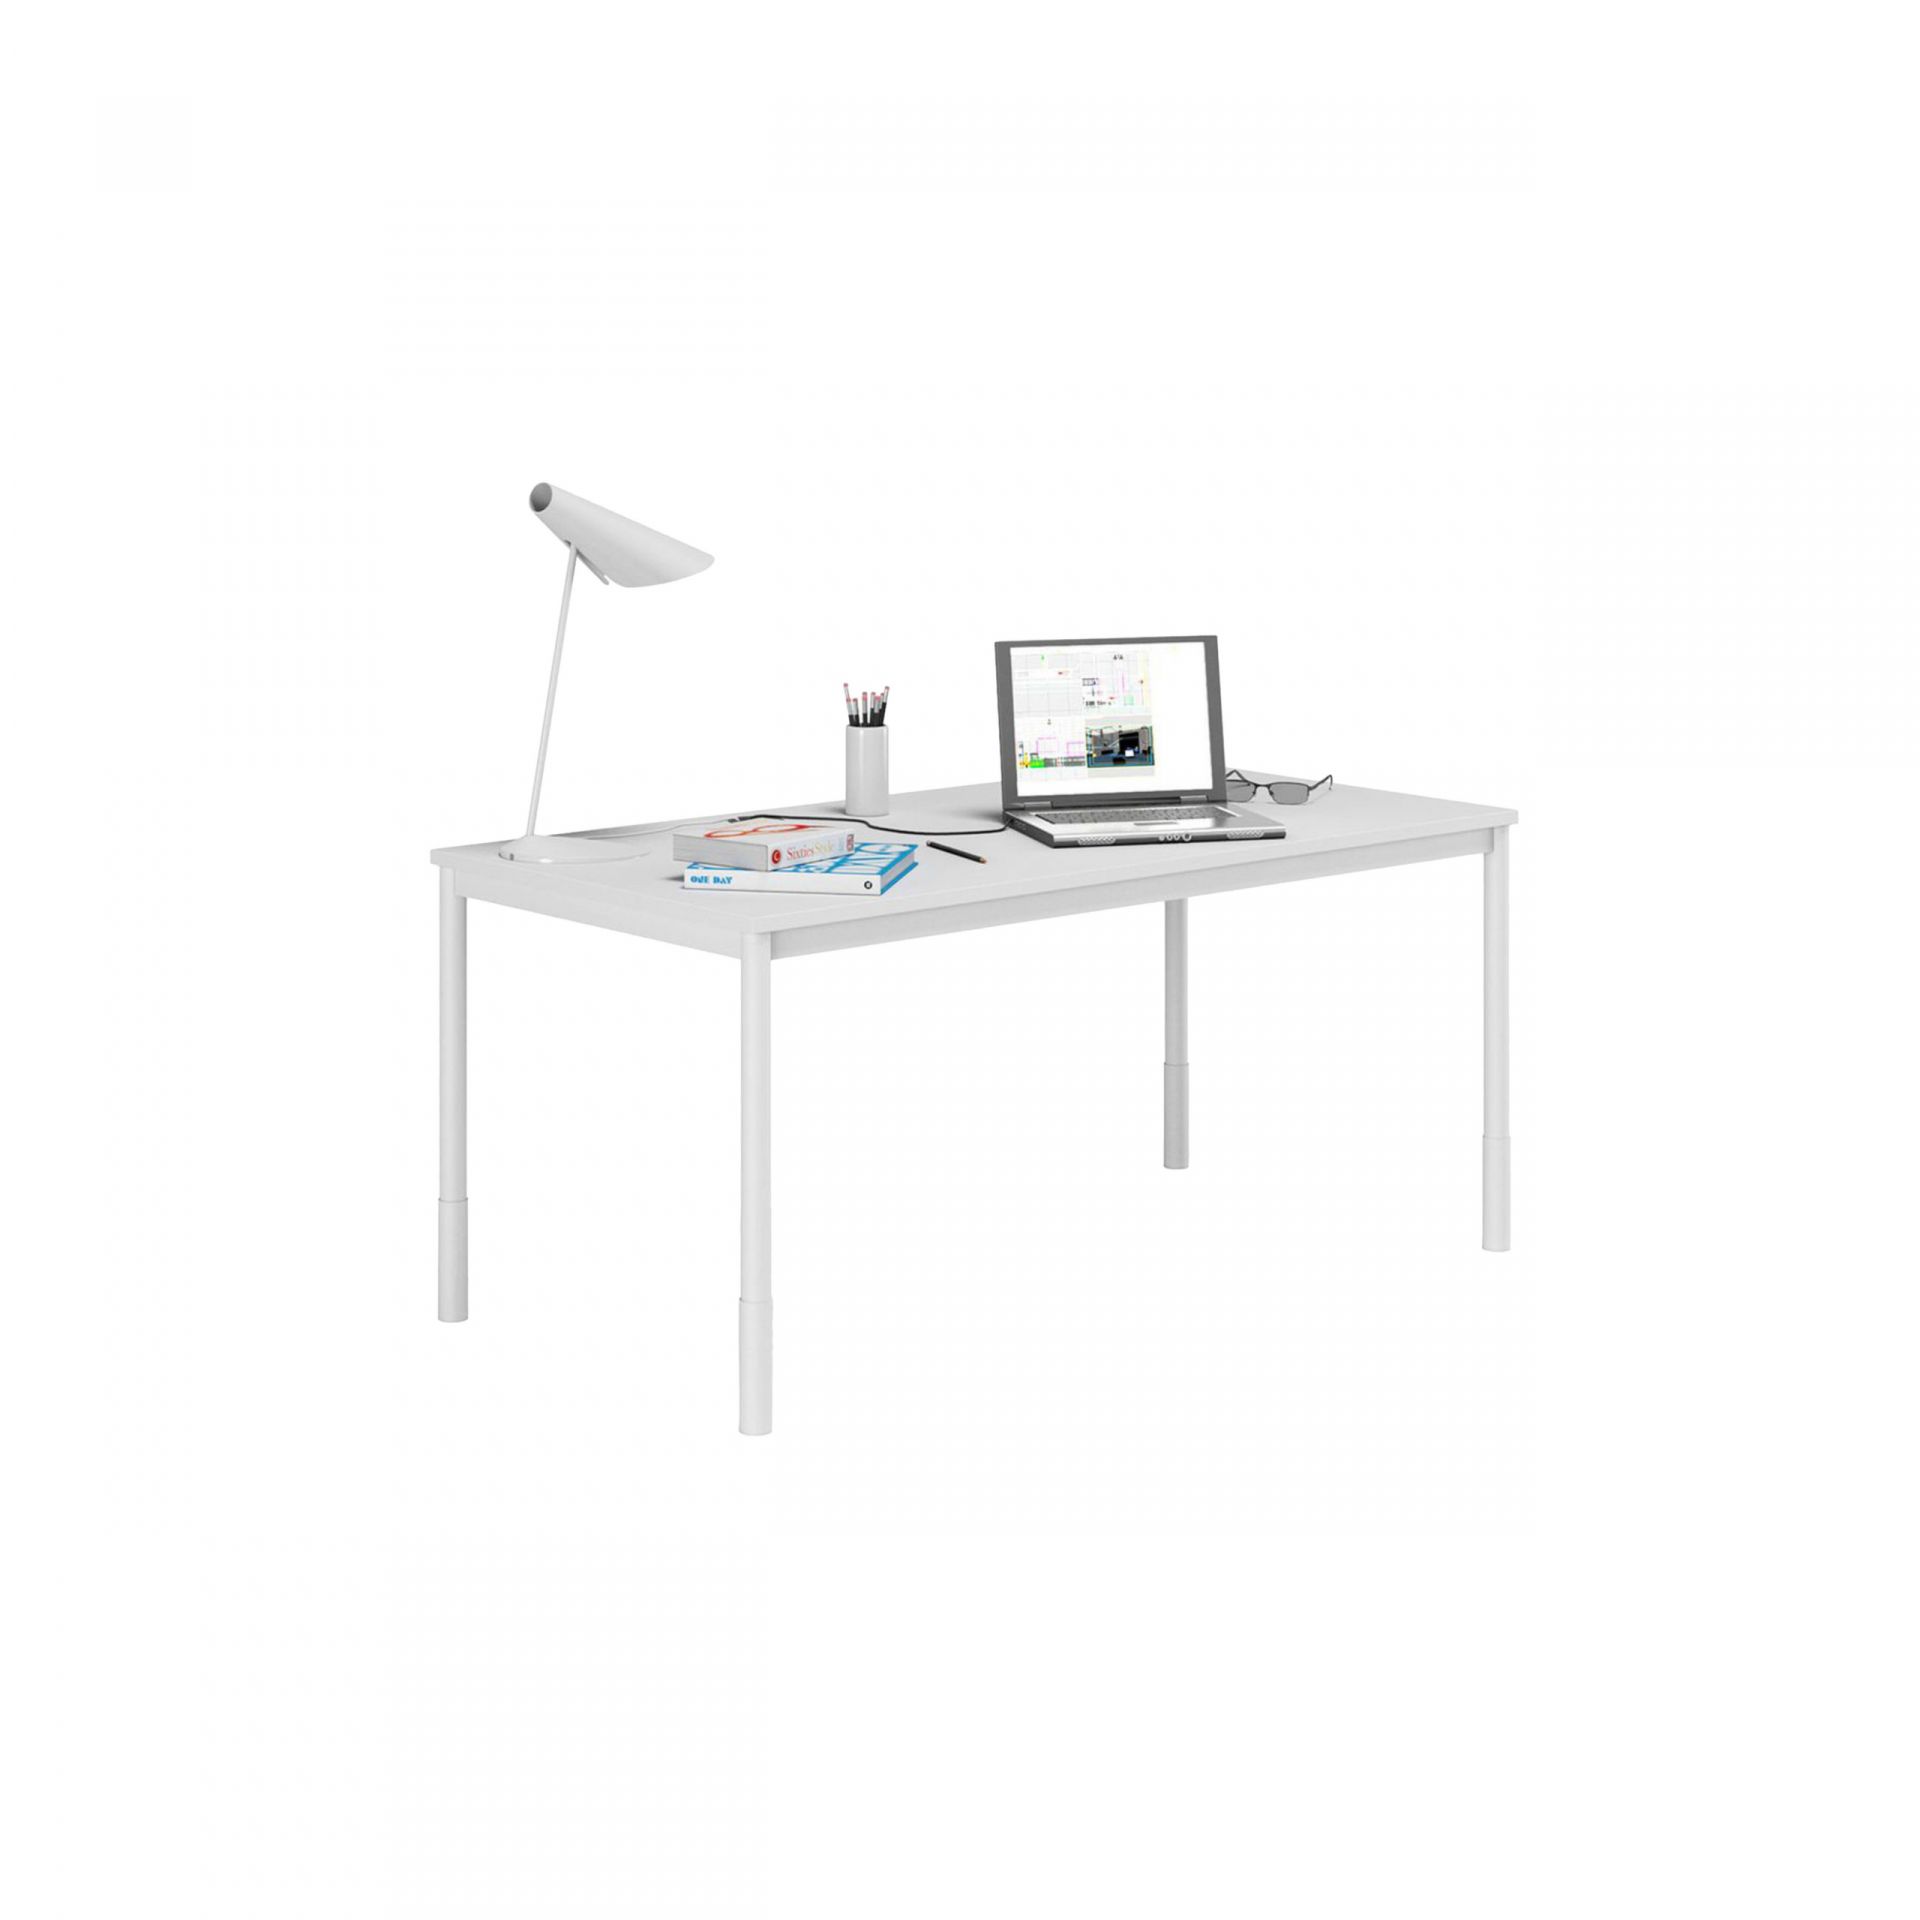 Team Pro Desk/meeting table product image 1